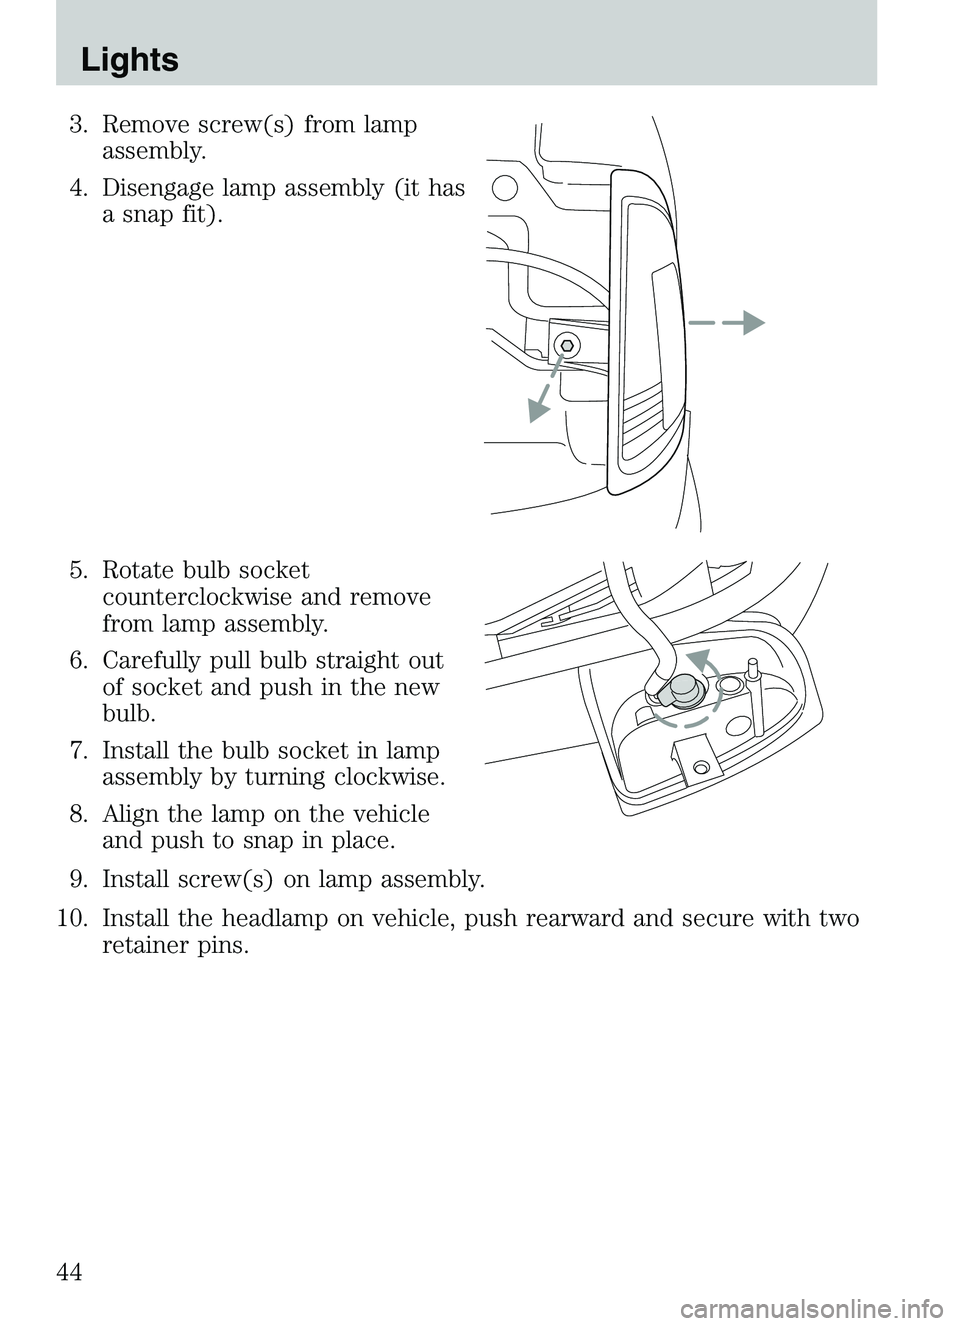 MAZDA MODEL B4000 4WD 2003  Owners Manual 3. Remove screw(s) from lampassembly.
4. Disengage lamp assembly (it has a snap fit).
5. Rotate bulb socket counterclockwise and remove
from lamp assembly.
6. Carefully pull bulb straight out of socke